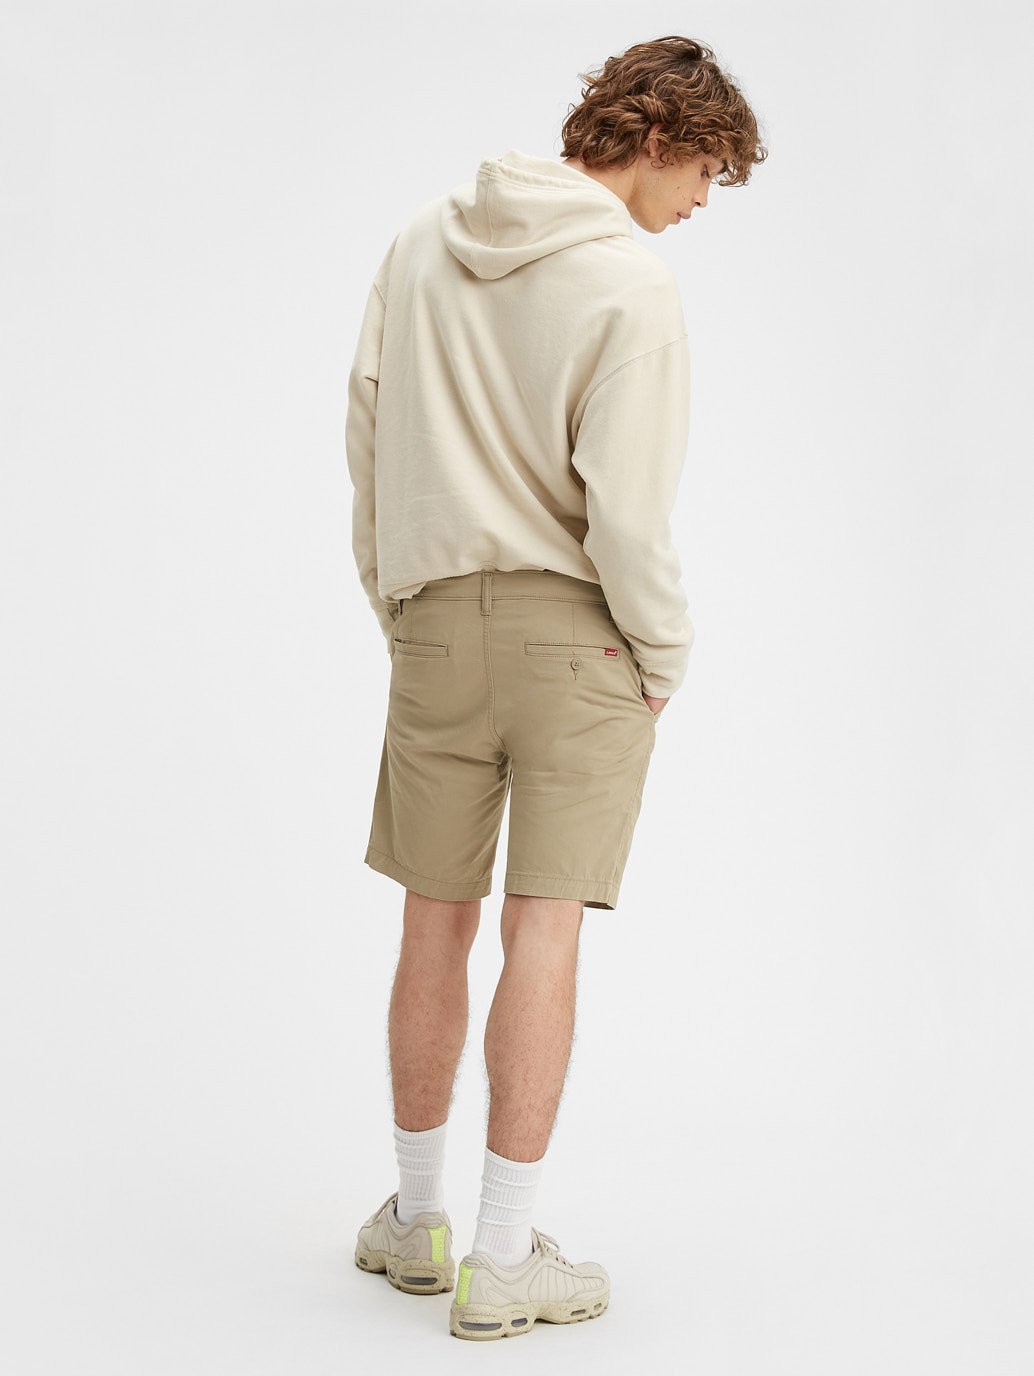 Buy Levi's® Men's XX Chino Shorts | Levi's® Official Online Store PH